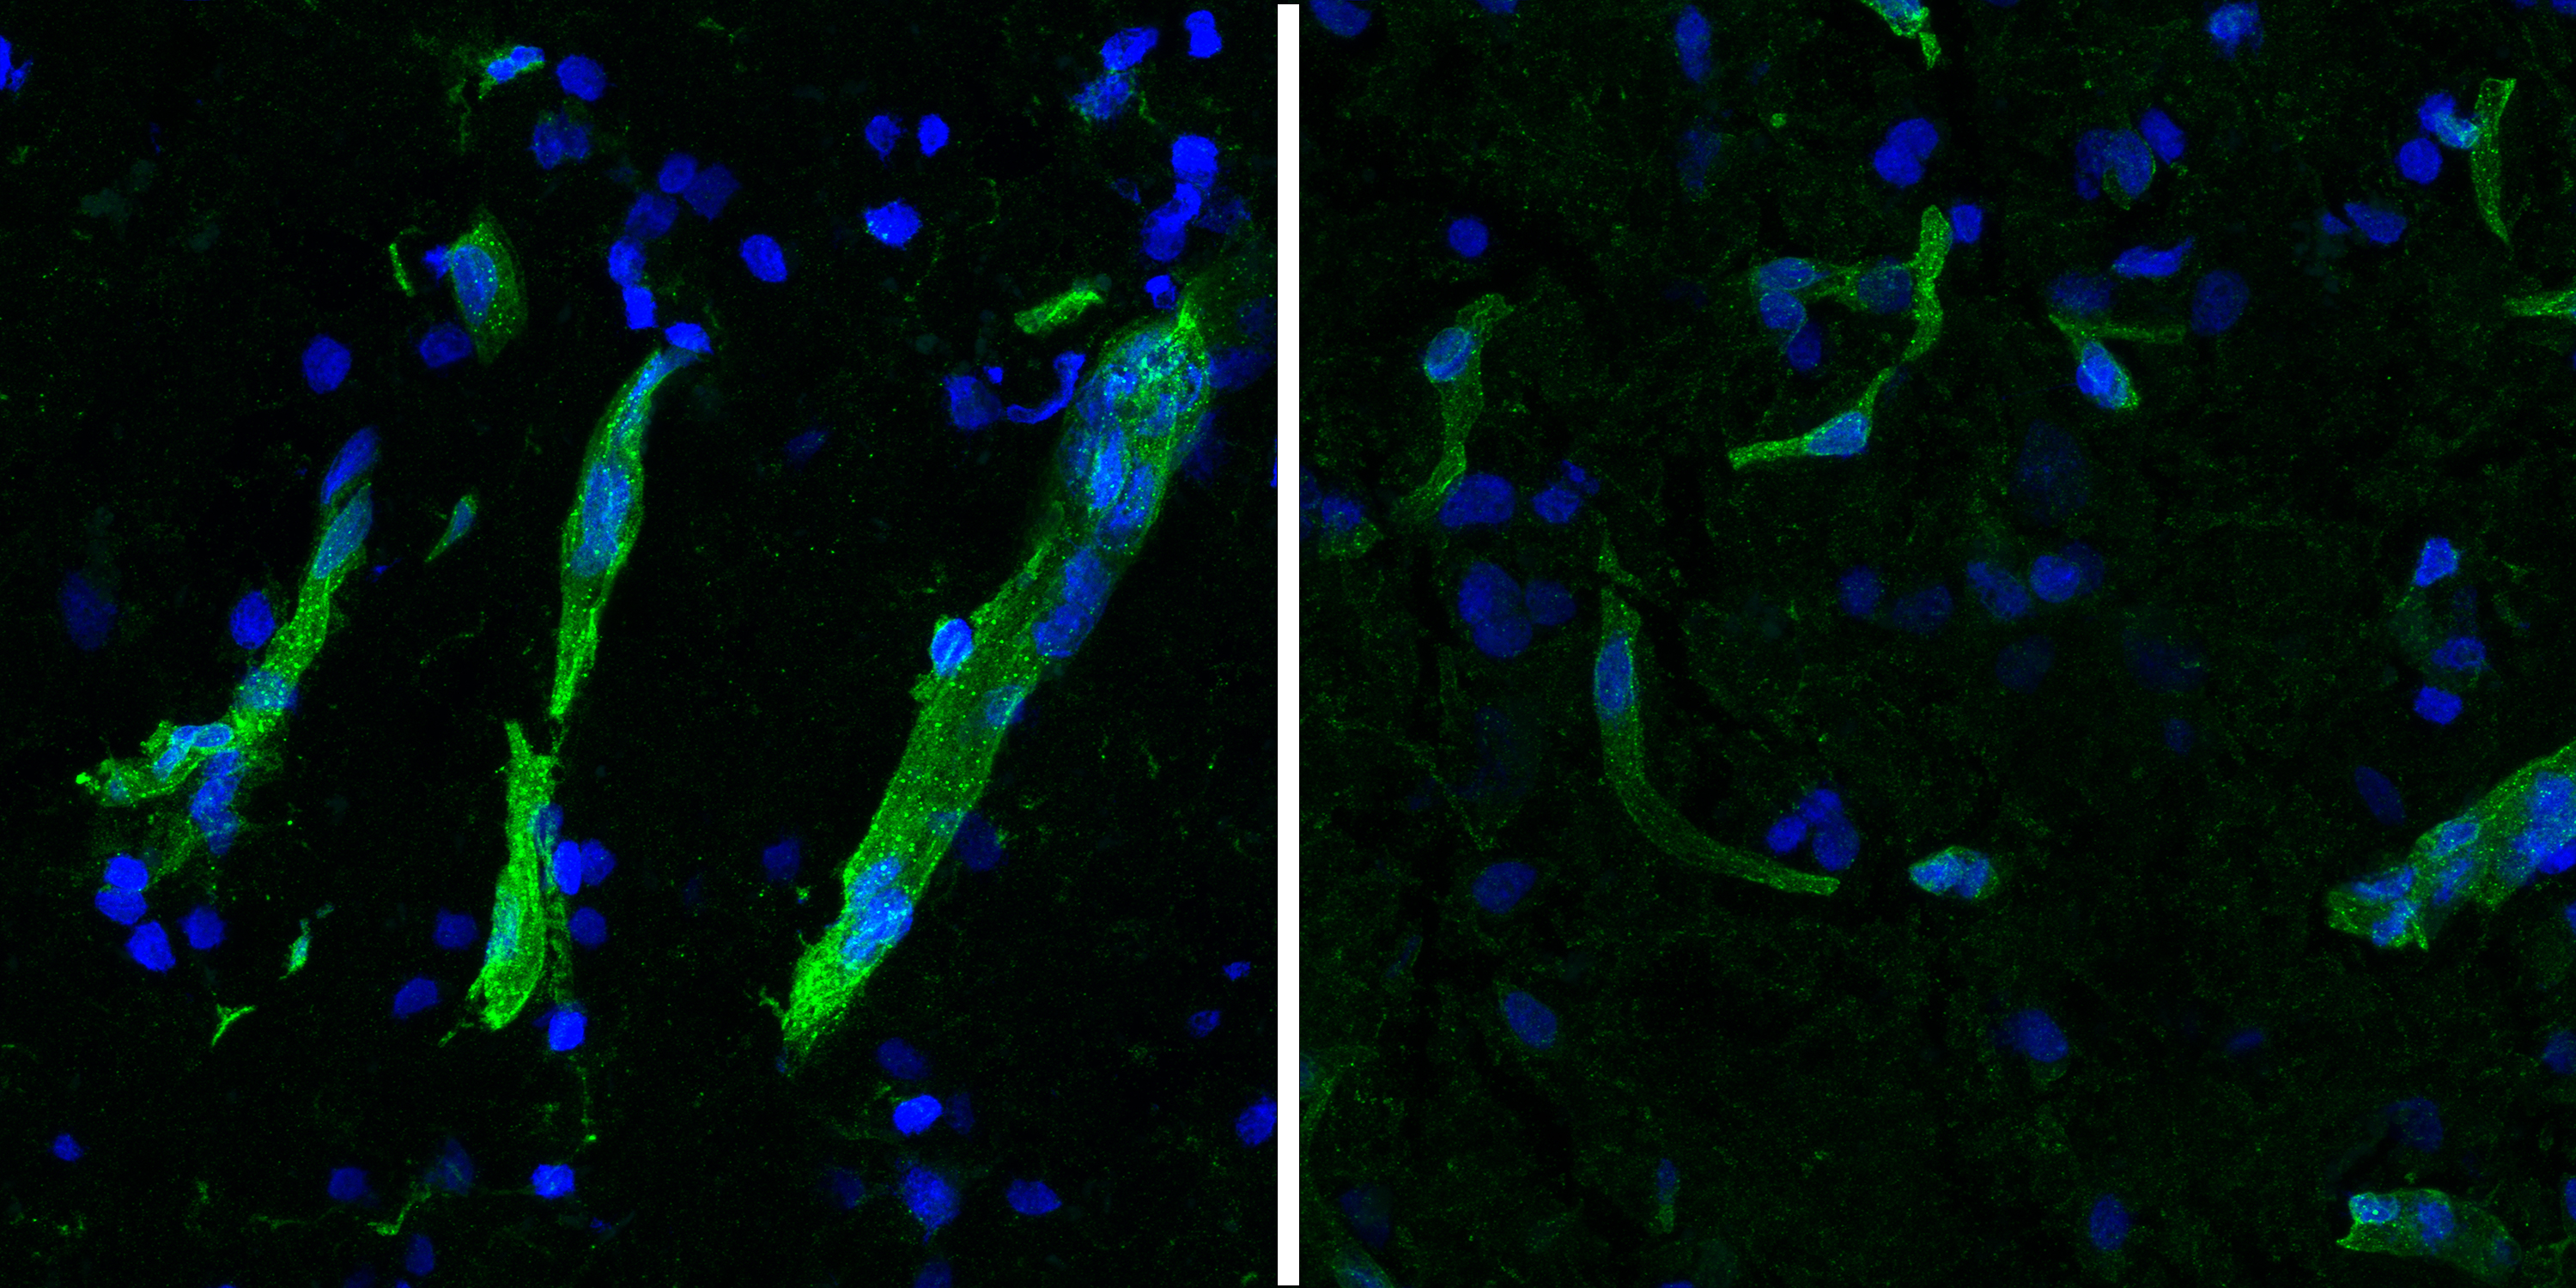 Two panels show diagonal streaks of green stained brain blood vessels over a background of blue cells. The green staining is much brighter in the left panel than in the right.